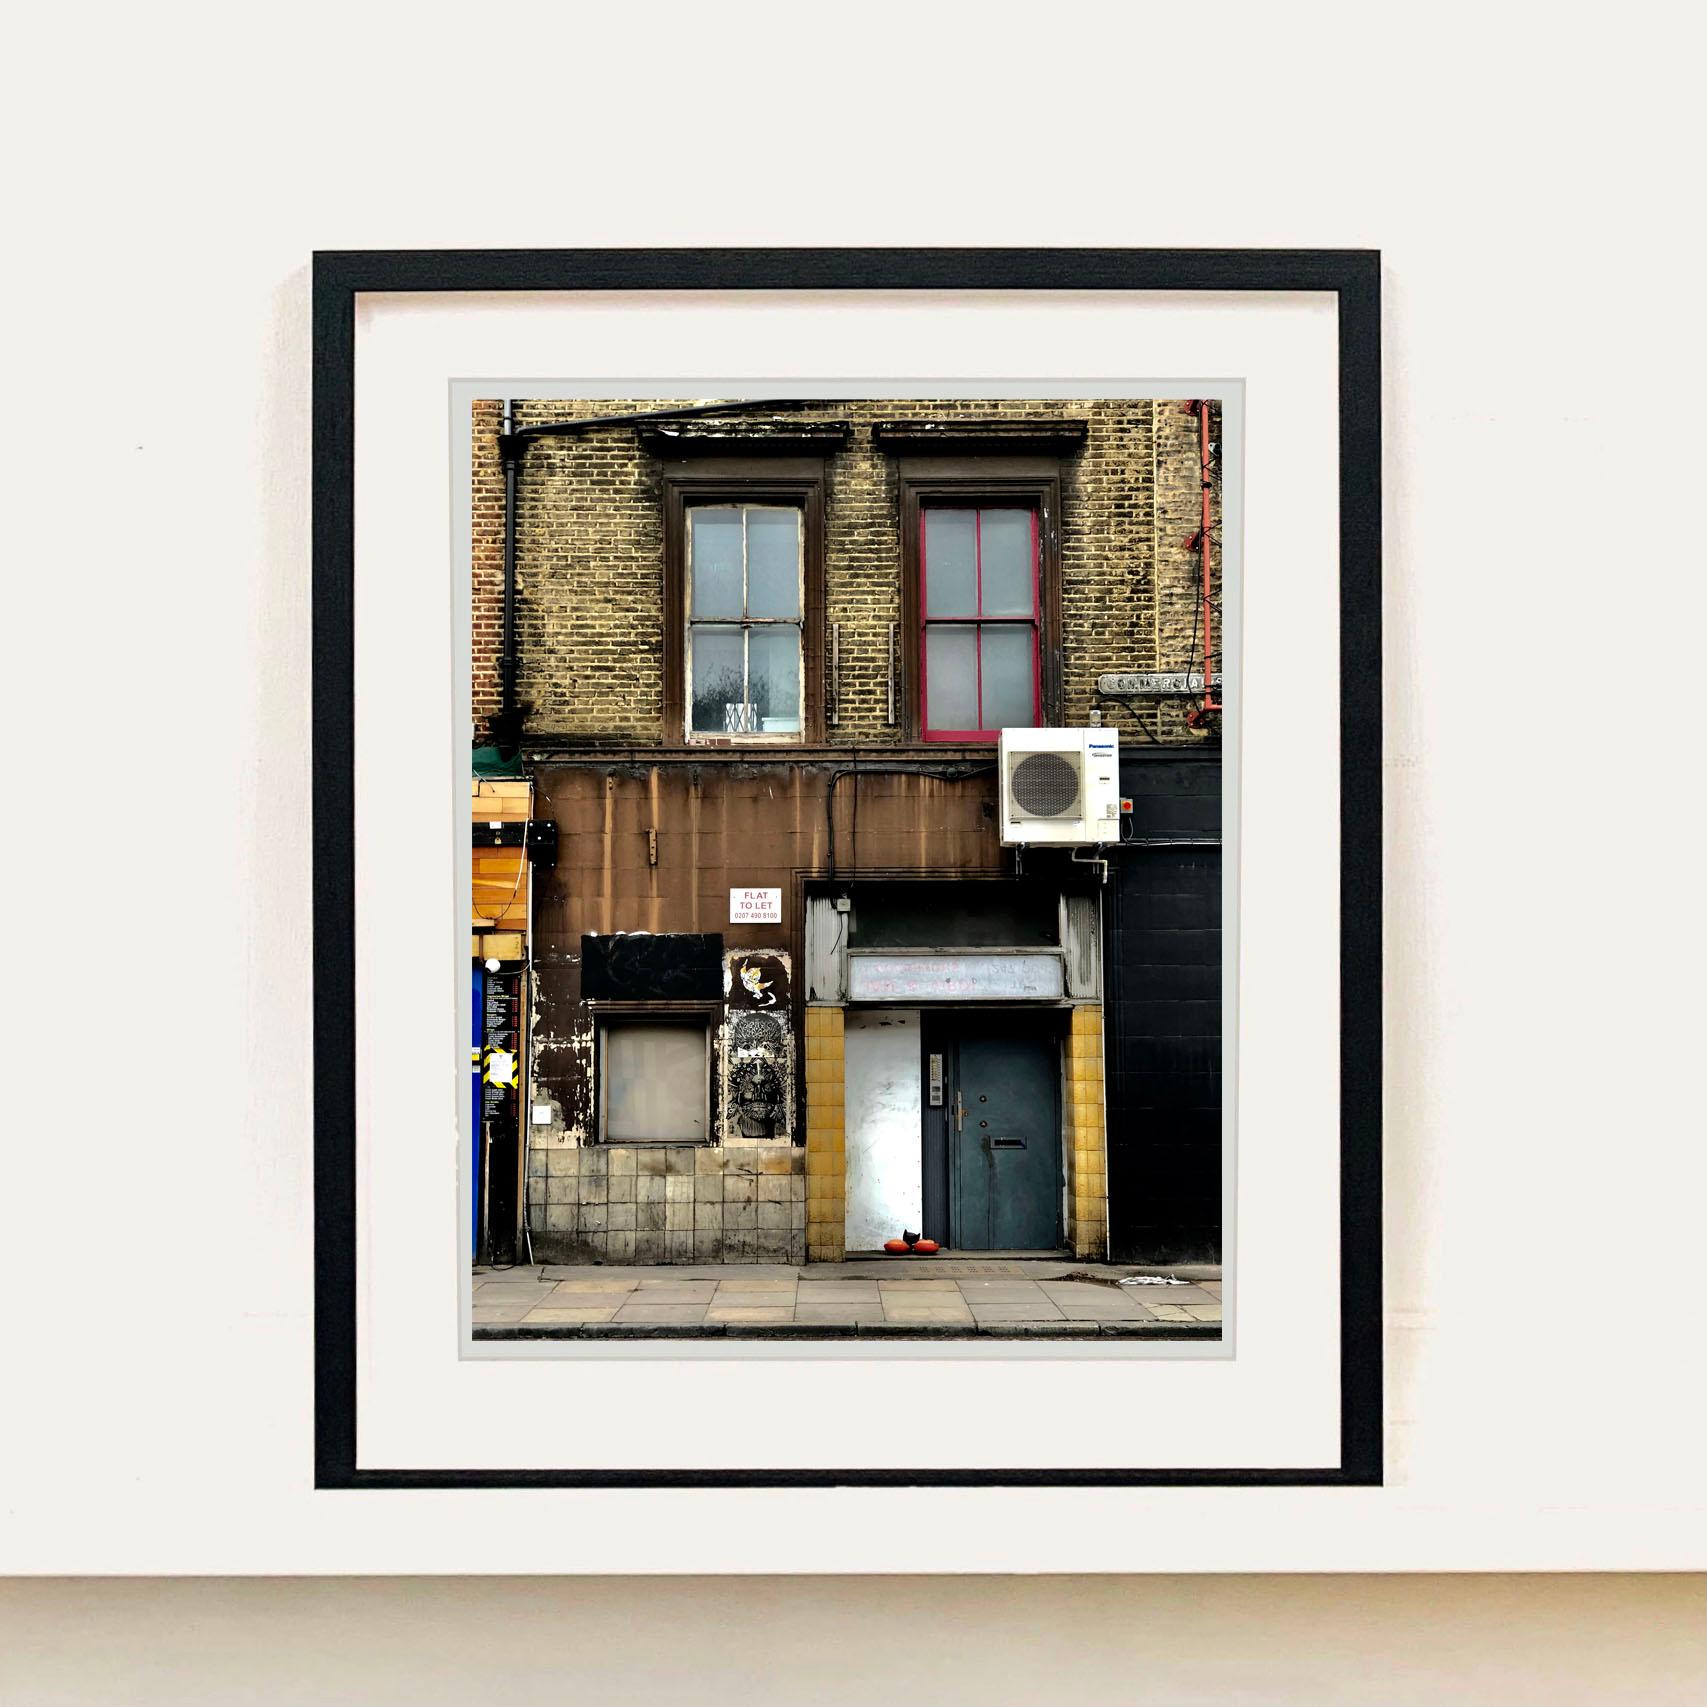 Flat to Let, London - East London architecture street photography - Print by Richard Heeps